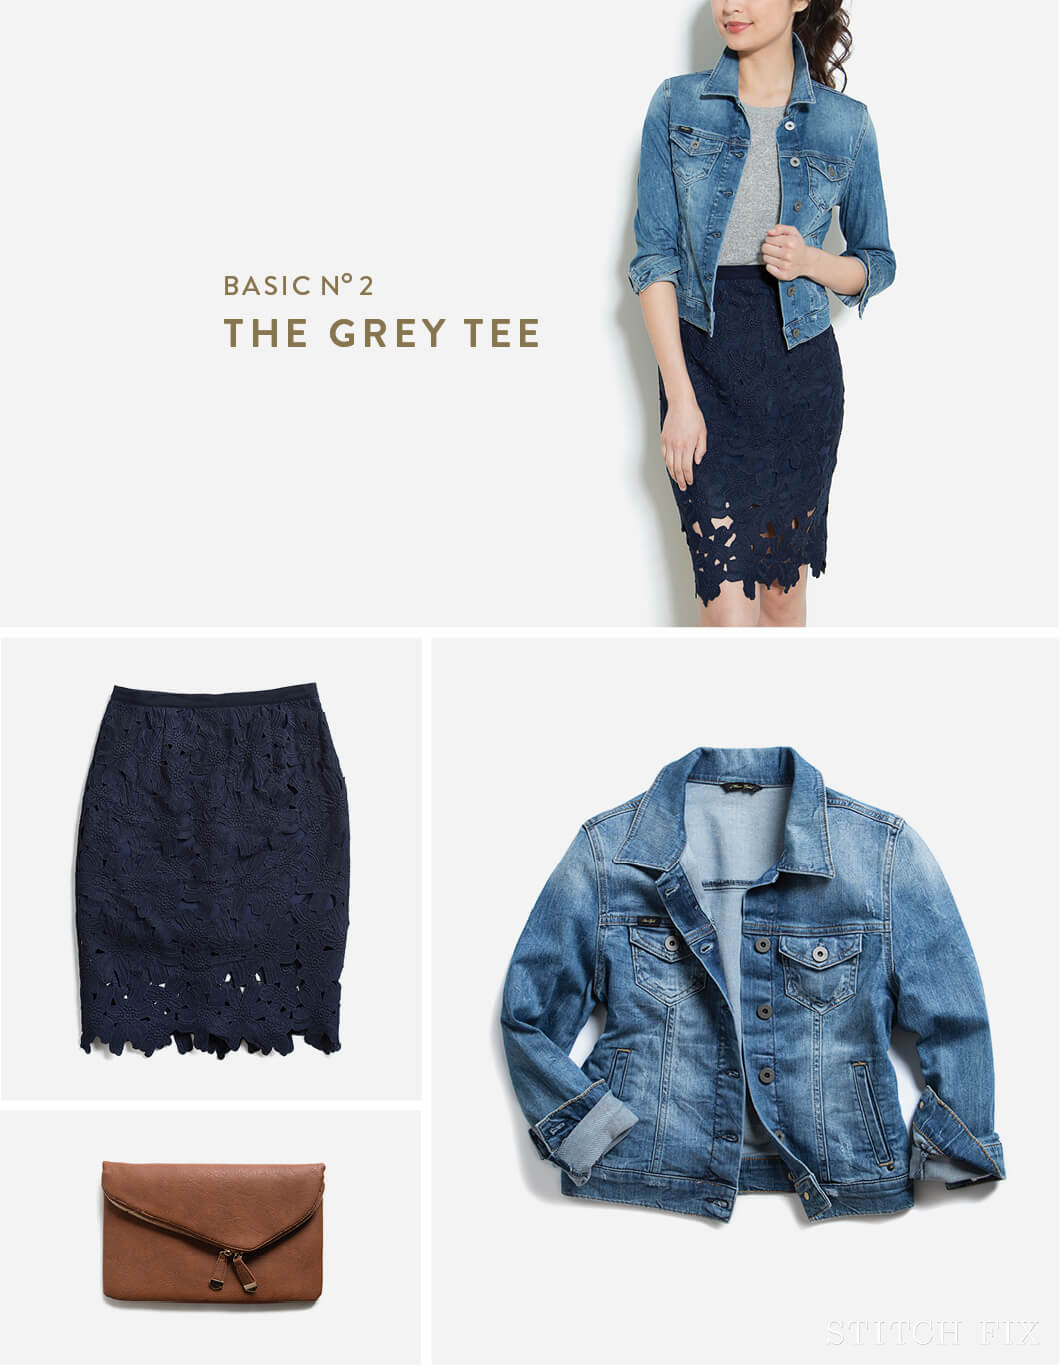 Get Inspired by Hundreds of Outfit Ideas for All Styles | Stitch Fix Style